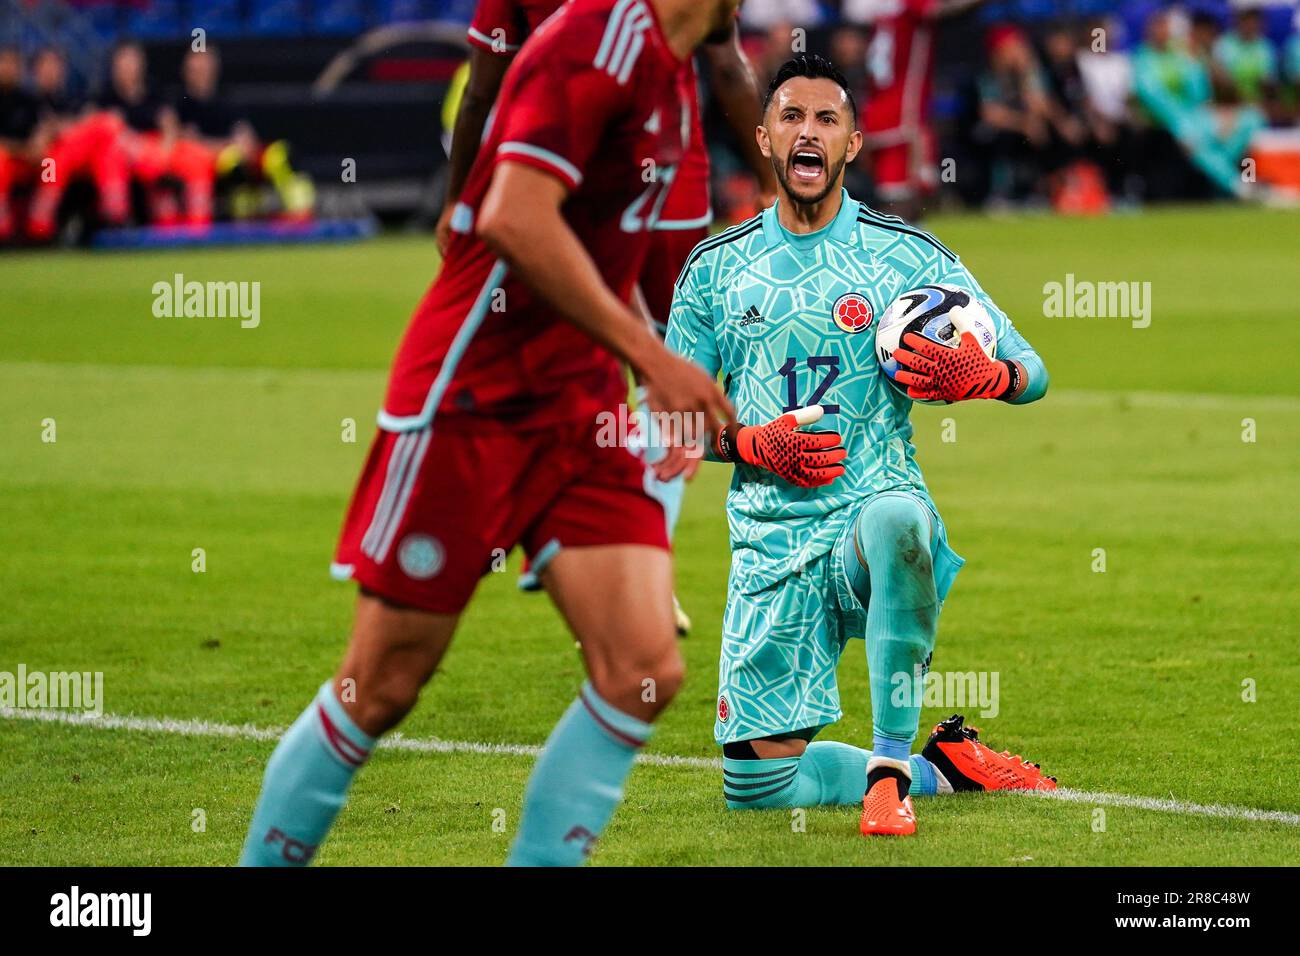 Gelsenkirchen, Germany. 20th June, 2023. GELSENKIRCHEN, GERMANY - JUNE 20: Goalkeeper Camilo Vargas of Colombia shouting during the International Friendly match between Germany and Colombia at the Veltins-Arena on June 20, 2023 in Gelsenkirchen, Germany (Photo by Joris Verwijst/Orange Pictures) Credit: Orange Pics BV/Alamy Live News Stock Photo